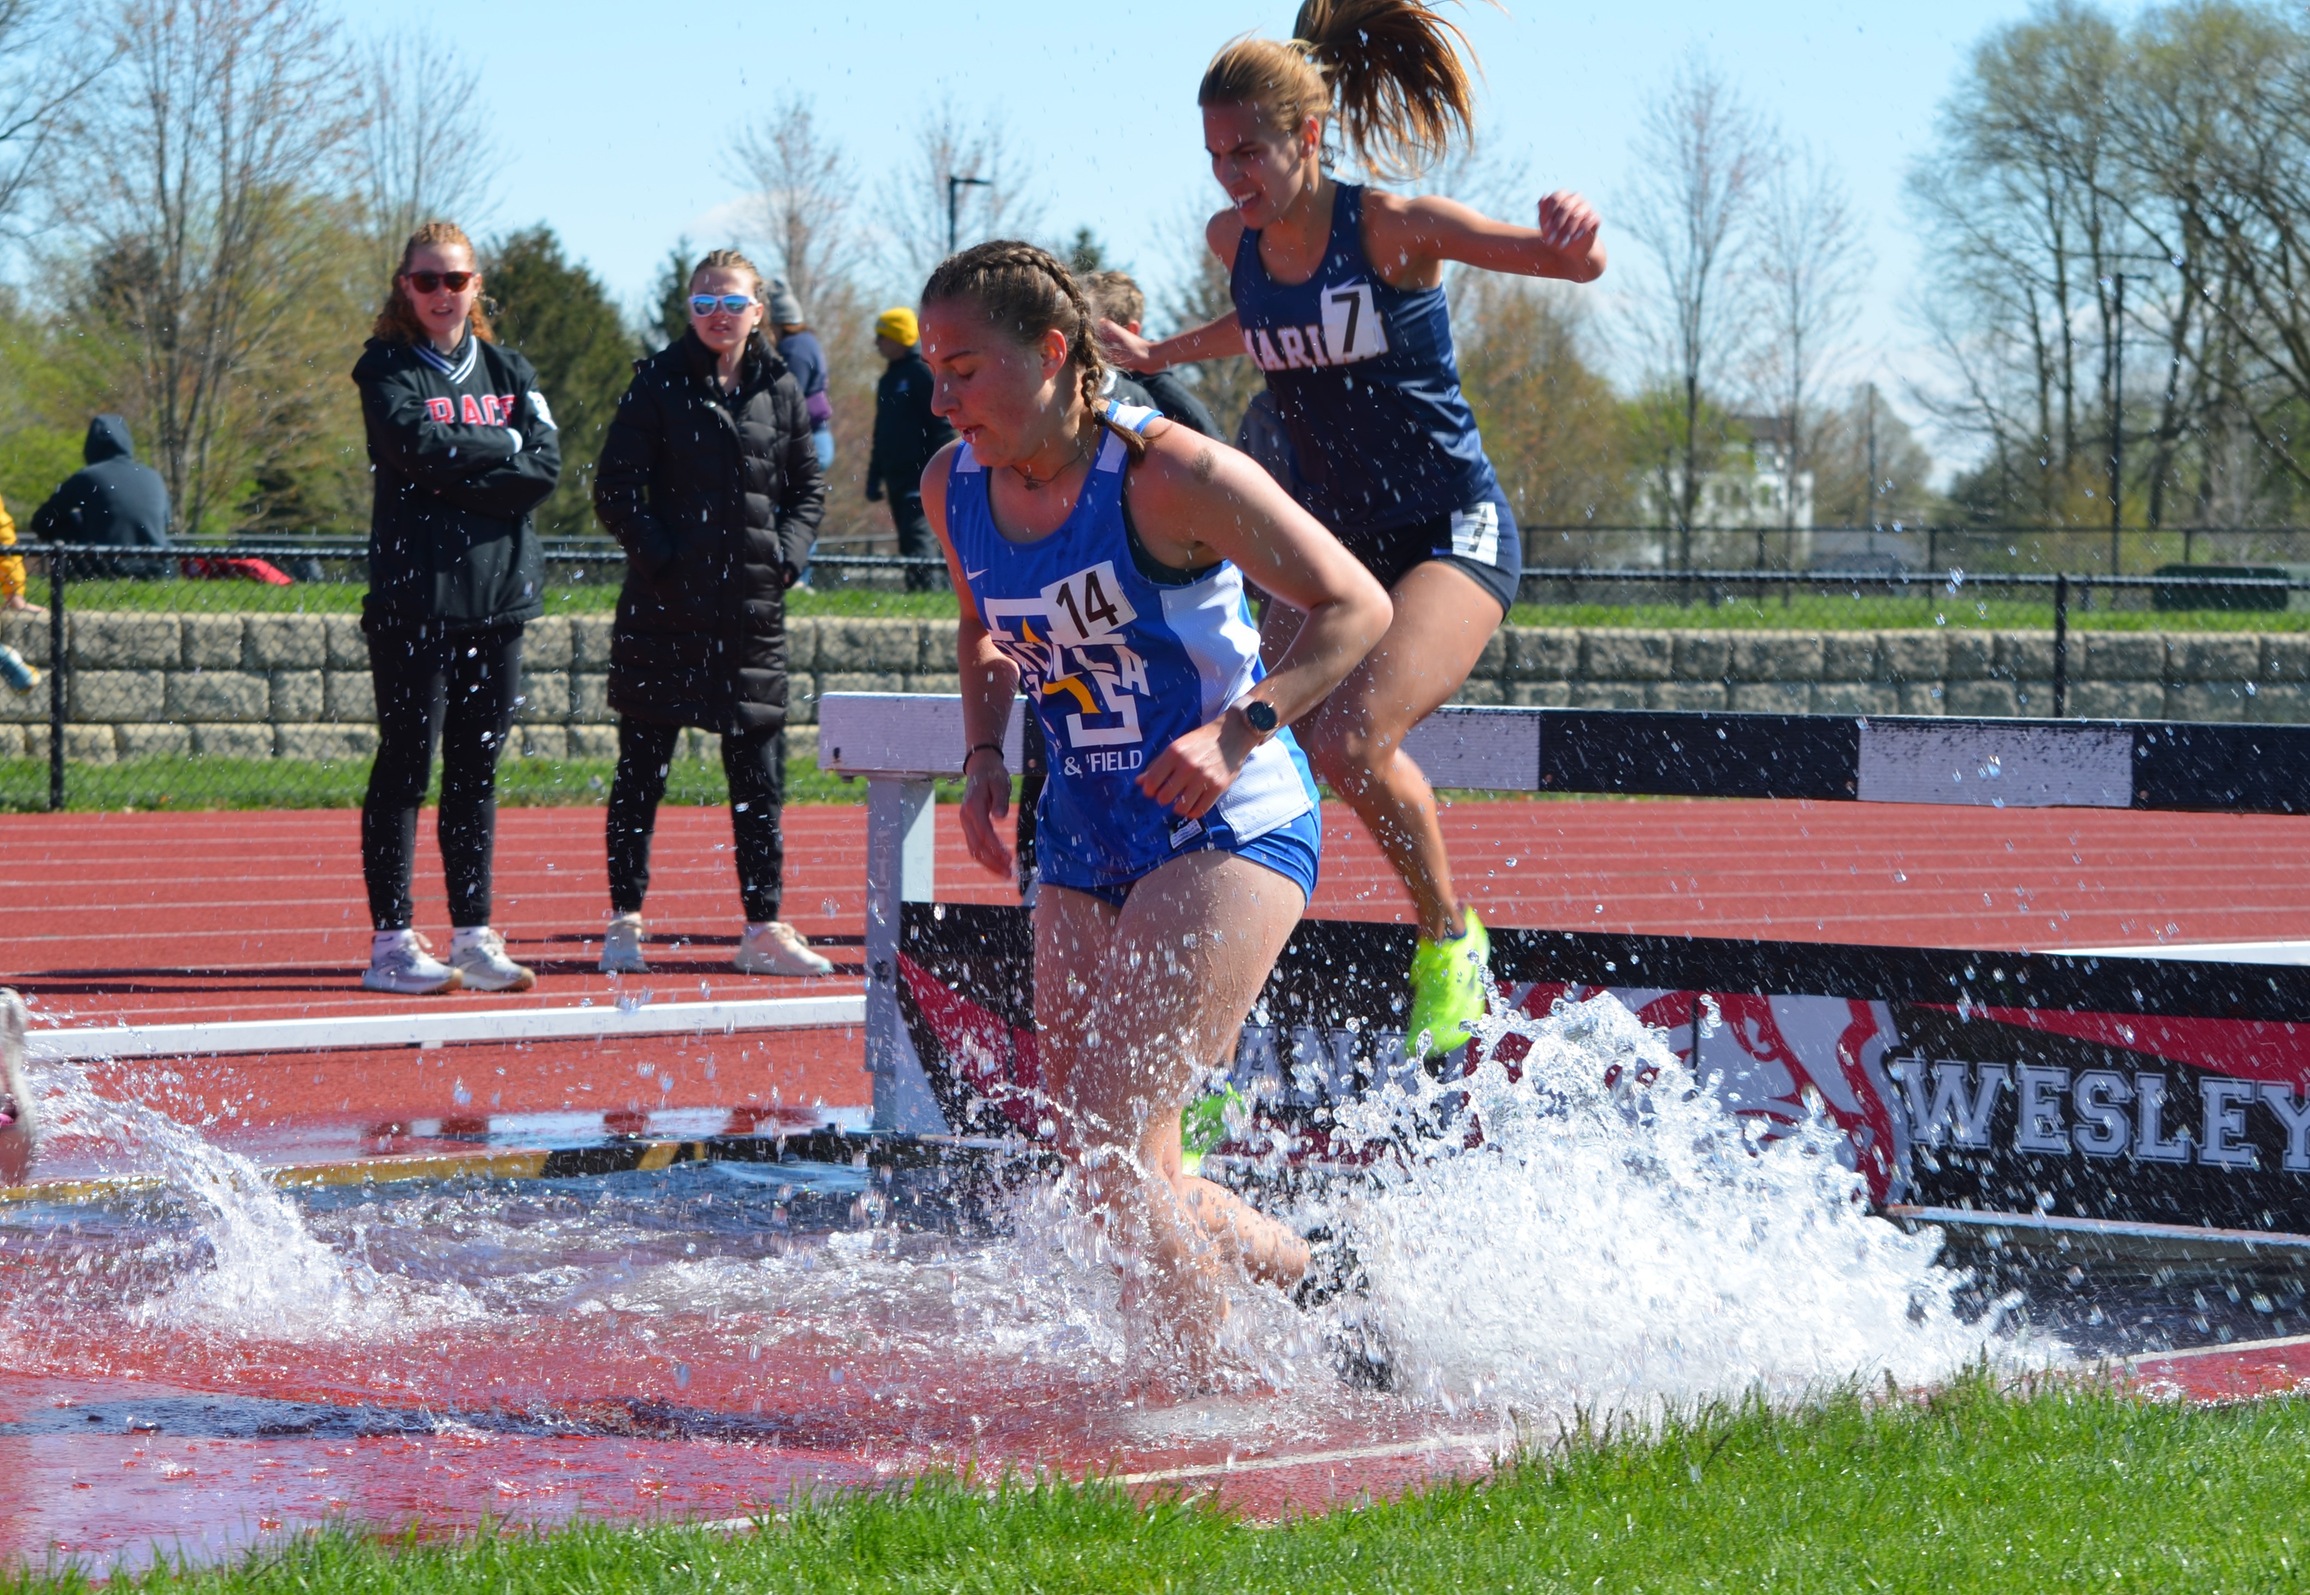 Charger Women Throw Well at Indiana State